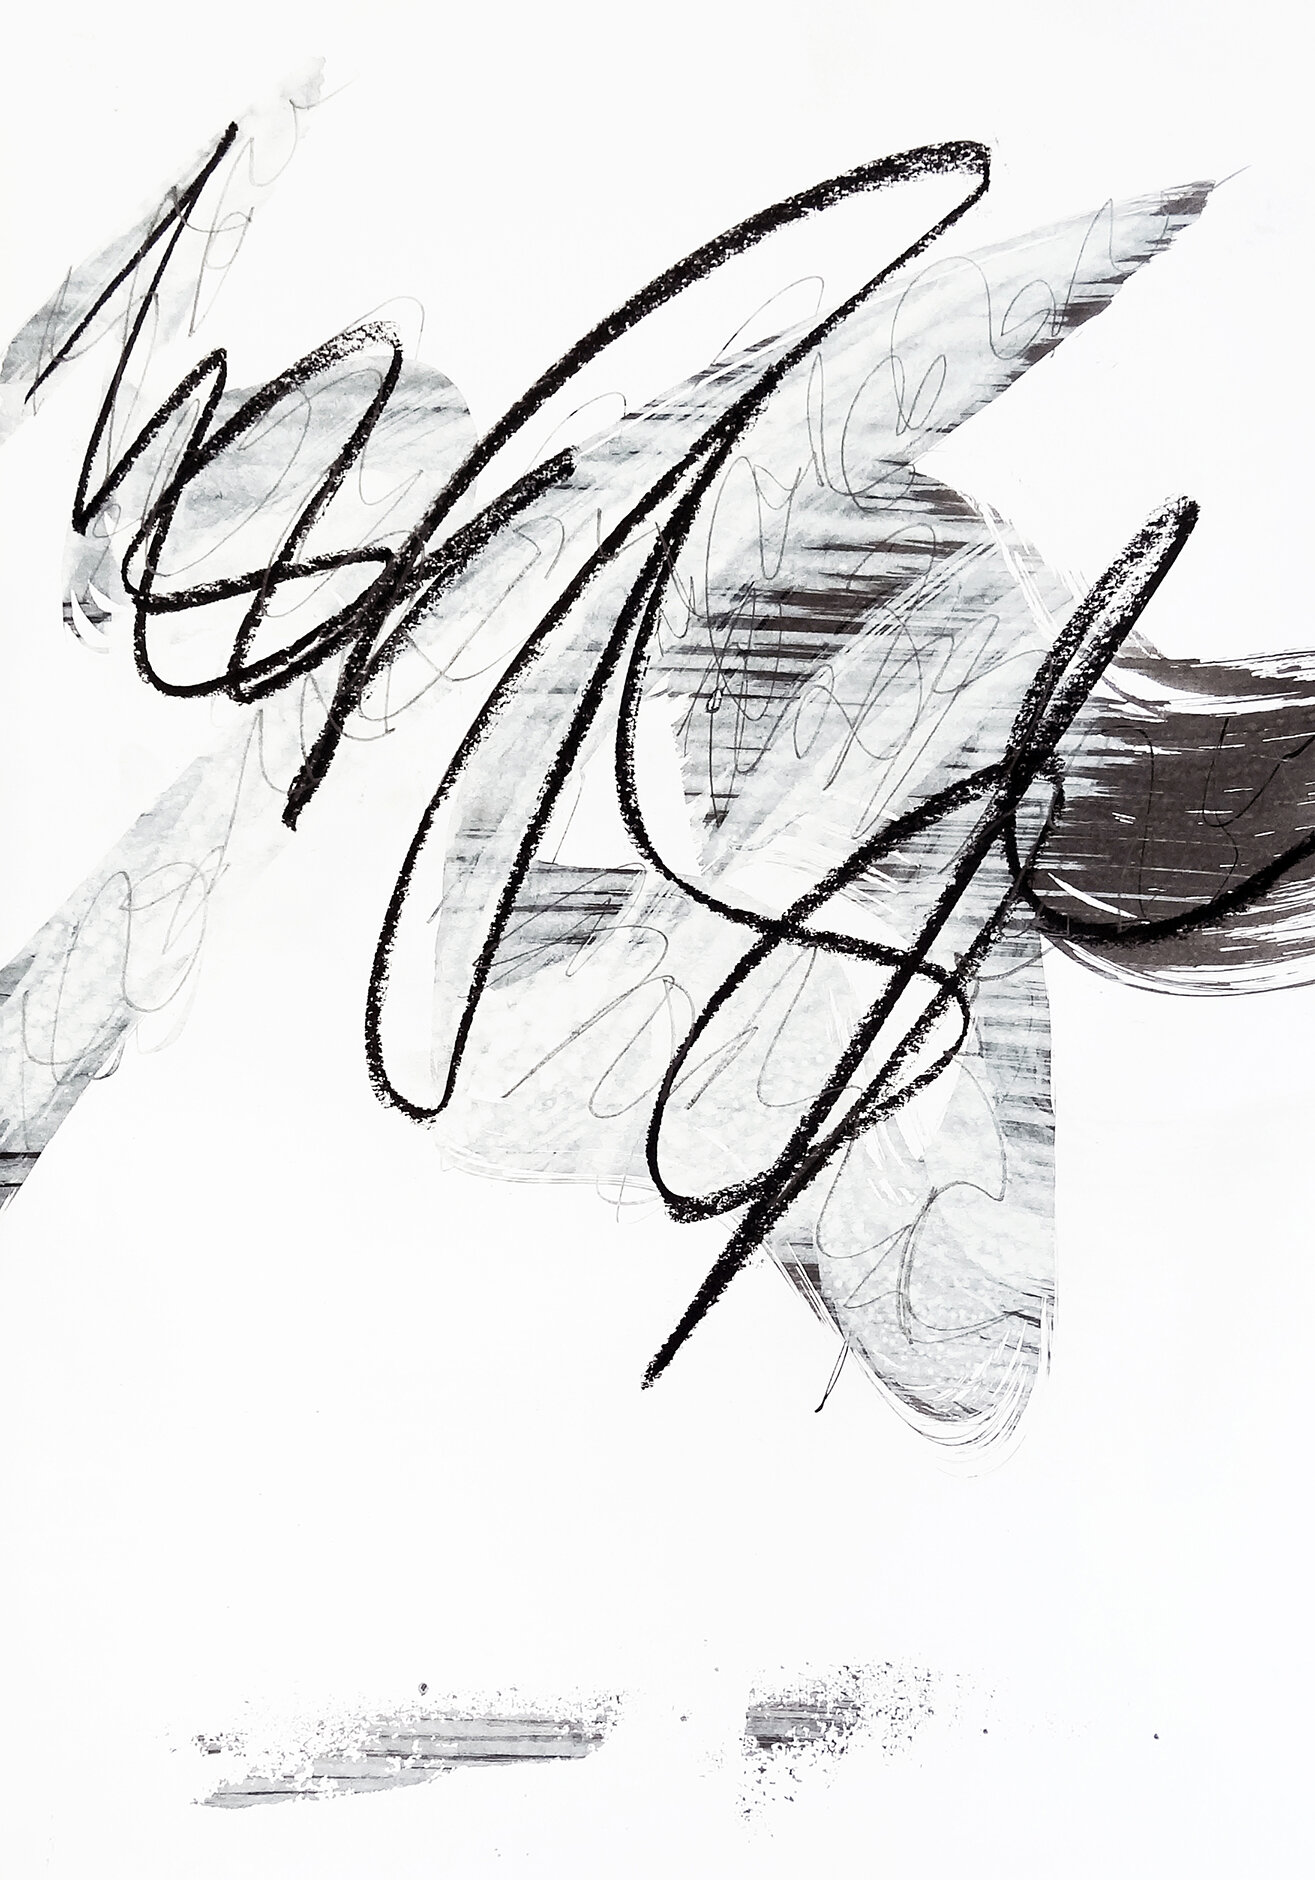  Untitled, 2020 calligraphy ink on paper 42,0 x 29,7 cm (4-20) 